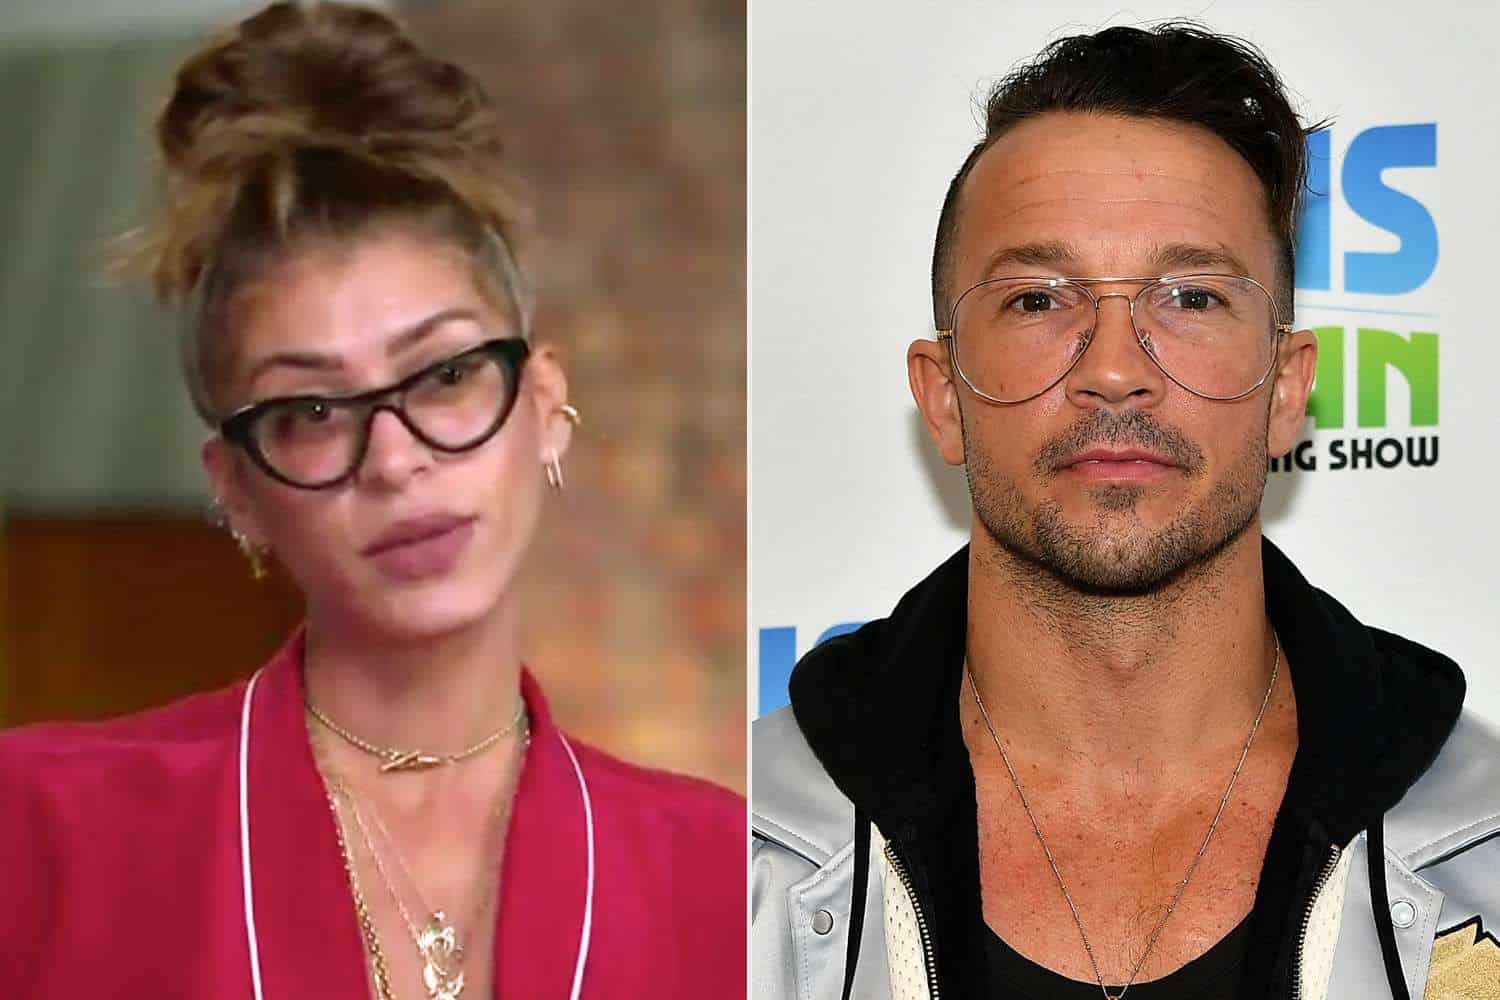 Who Did Carl Lentz Cheat With